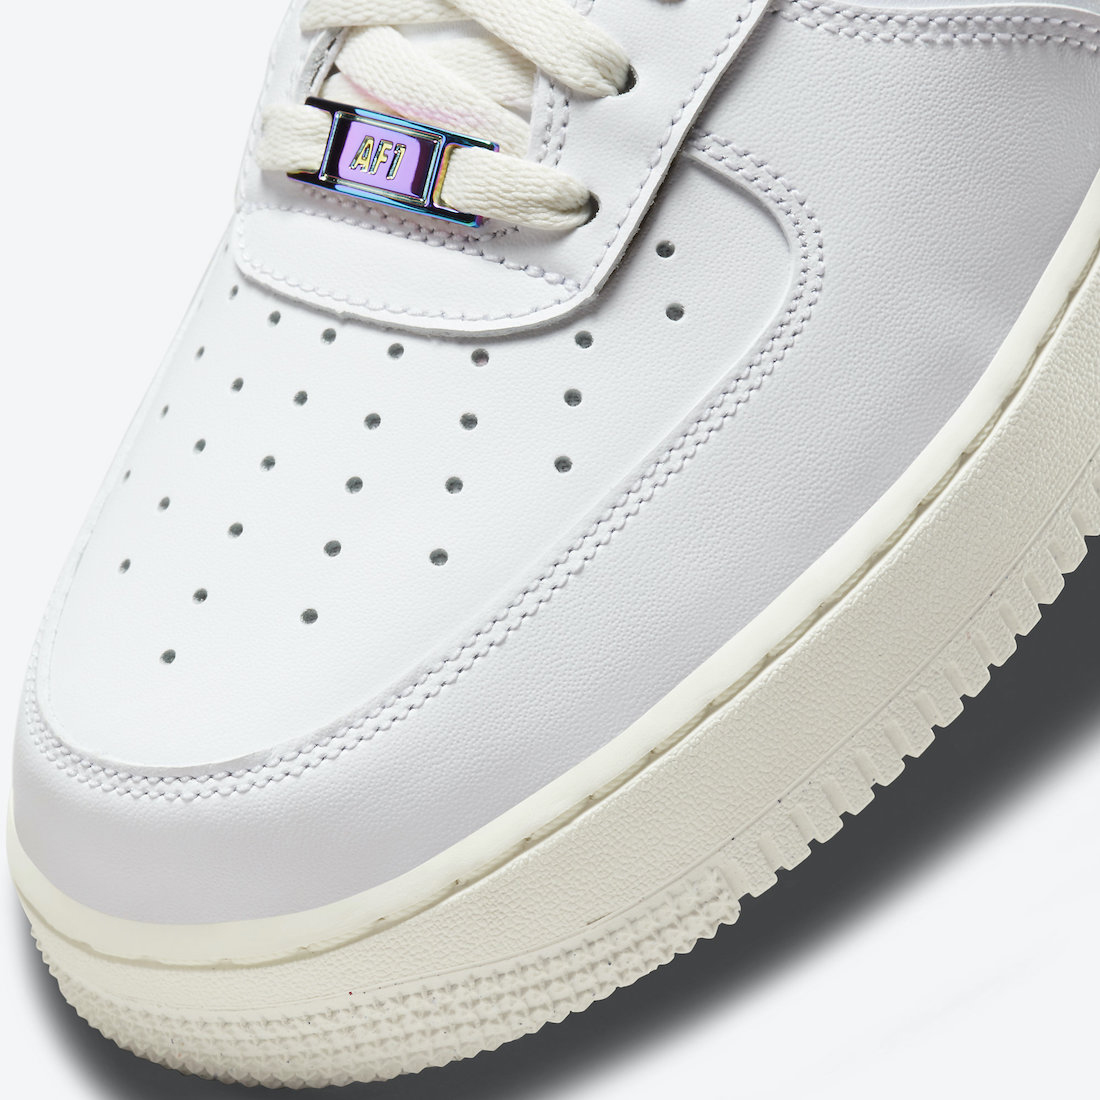 Nike Air Force 1 Low “The Great Unity” Release Date | Nice Kicks